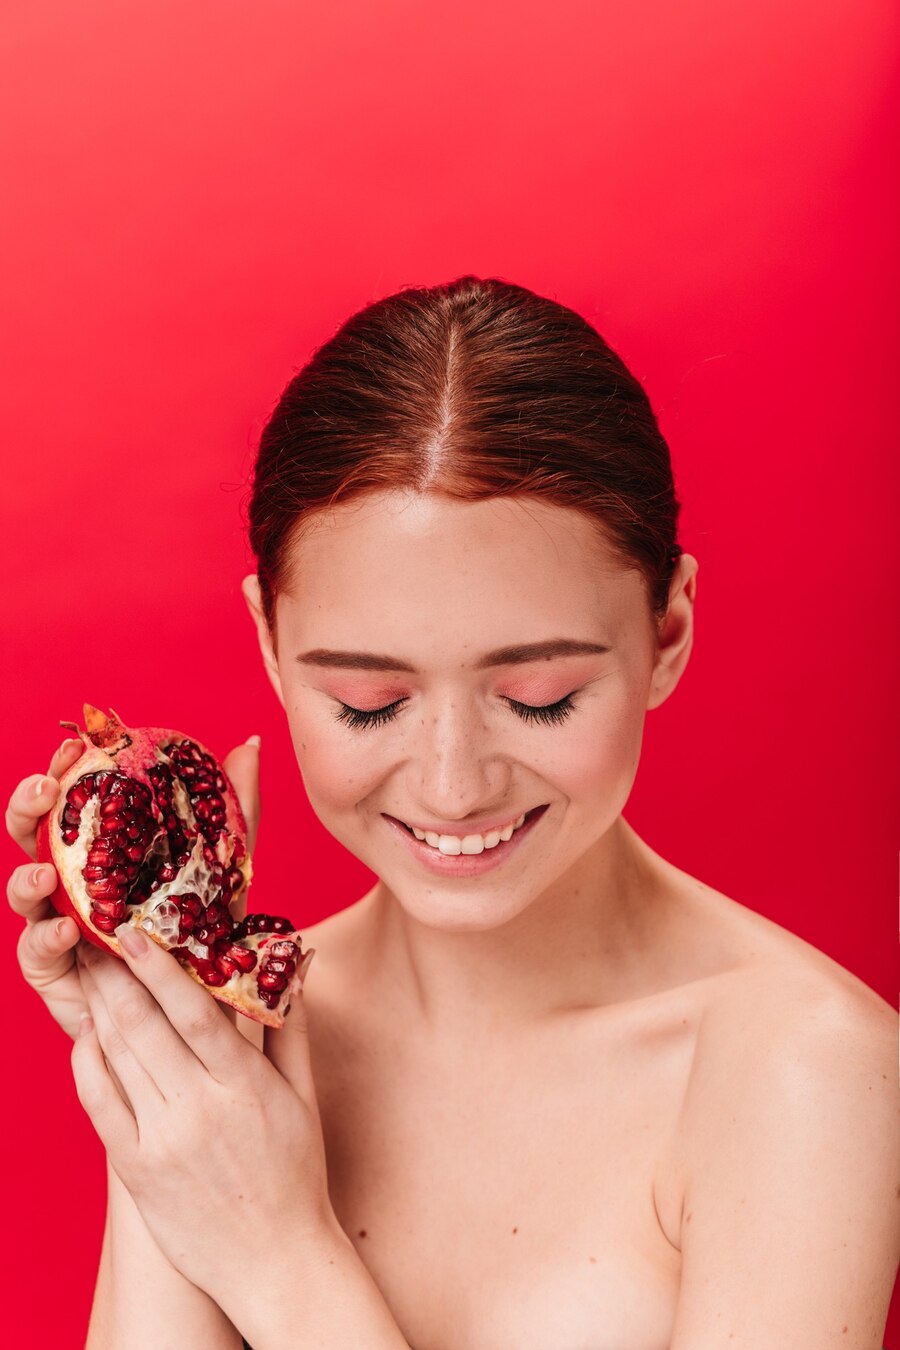 wonderful-ginger-girl-with-garnet-laughing-with-closed-eyes-studio-shot-blissful-young-woman-posing-with-ripe-pomegranate_197531-17758